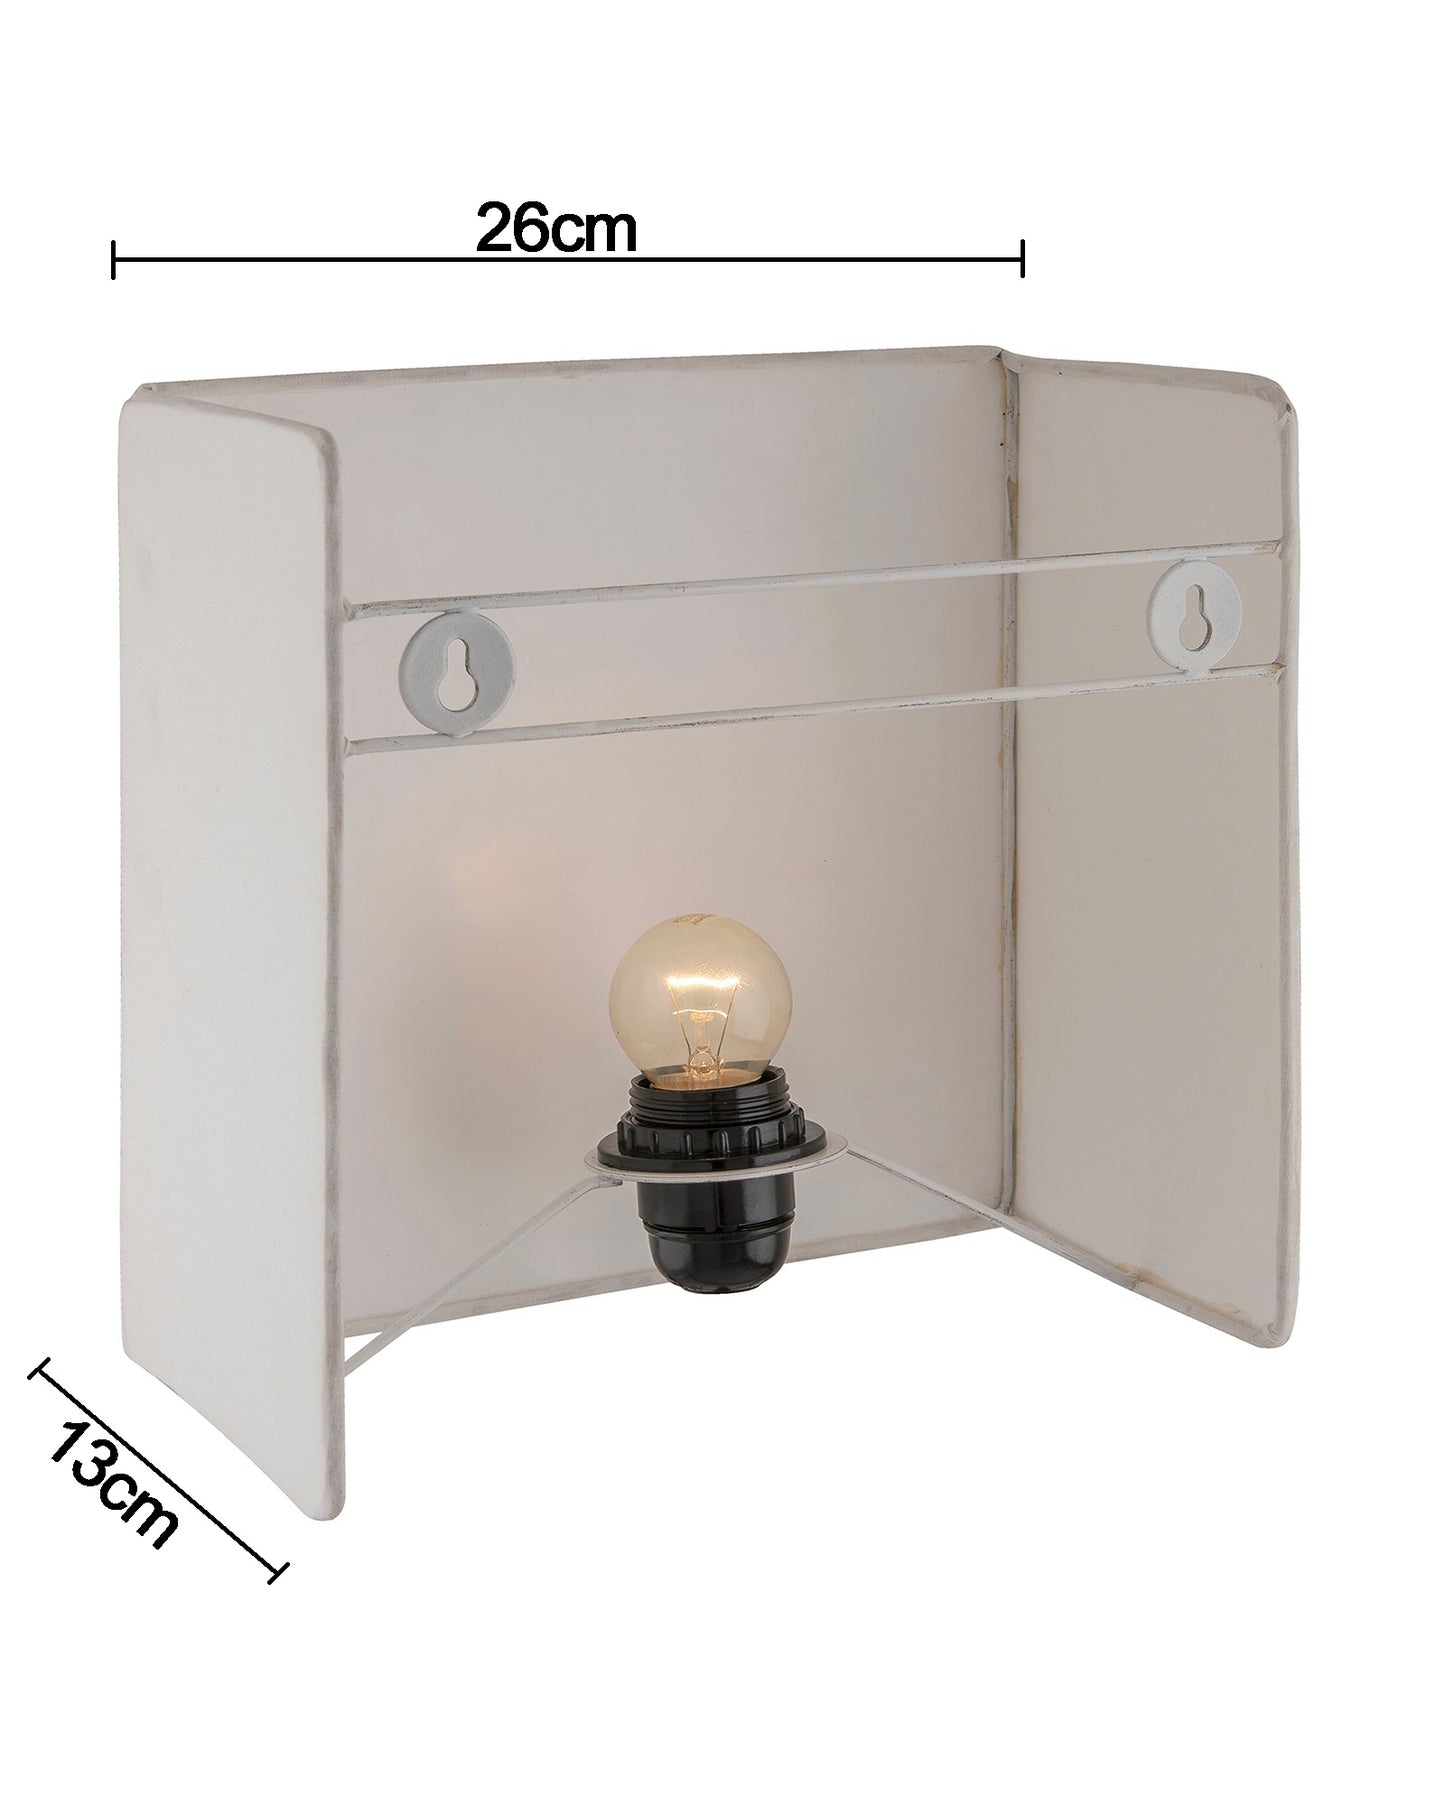 Wall Mounted Sconce Shade Lamp, Door Light E27, White Fabric,Square, Modern Wall Light